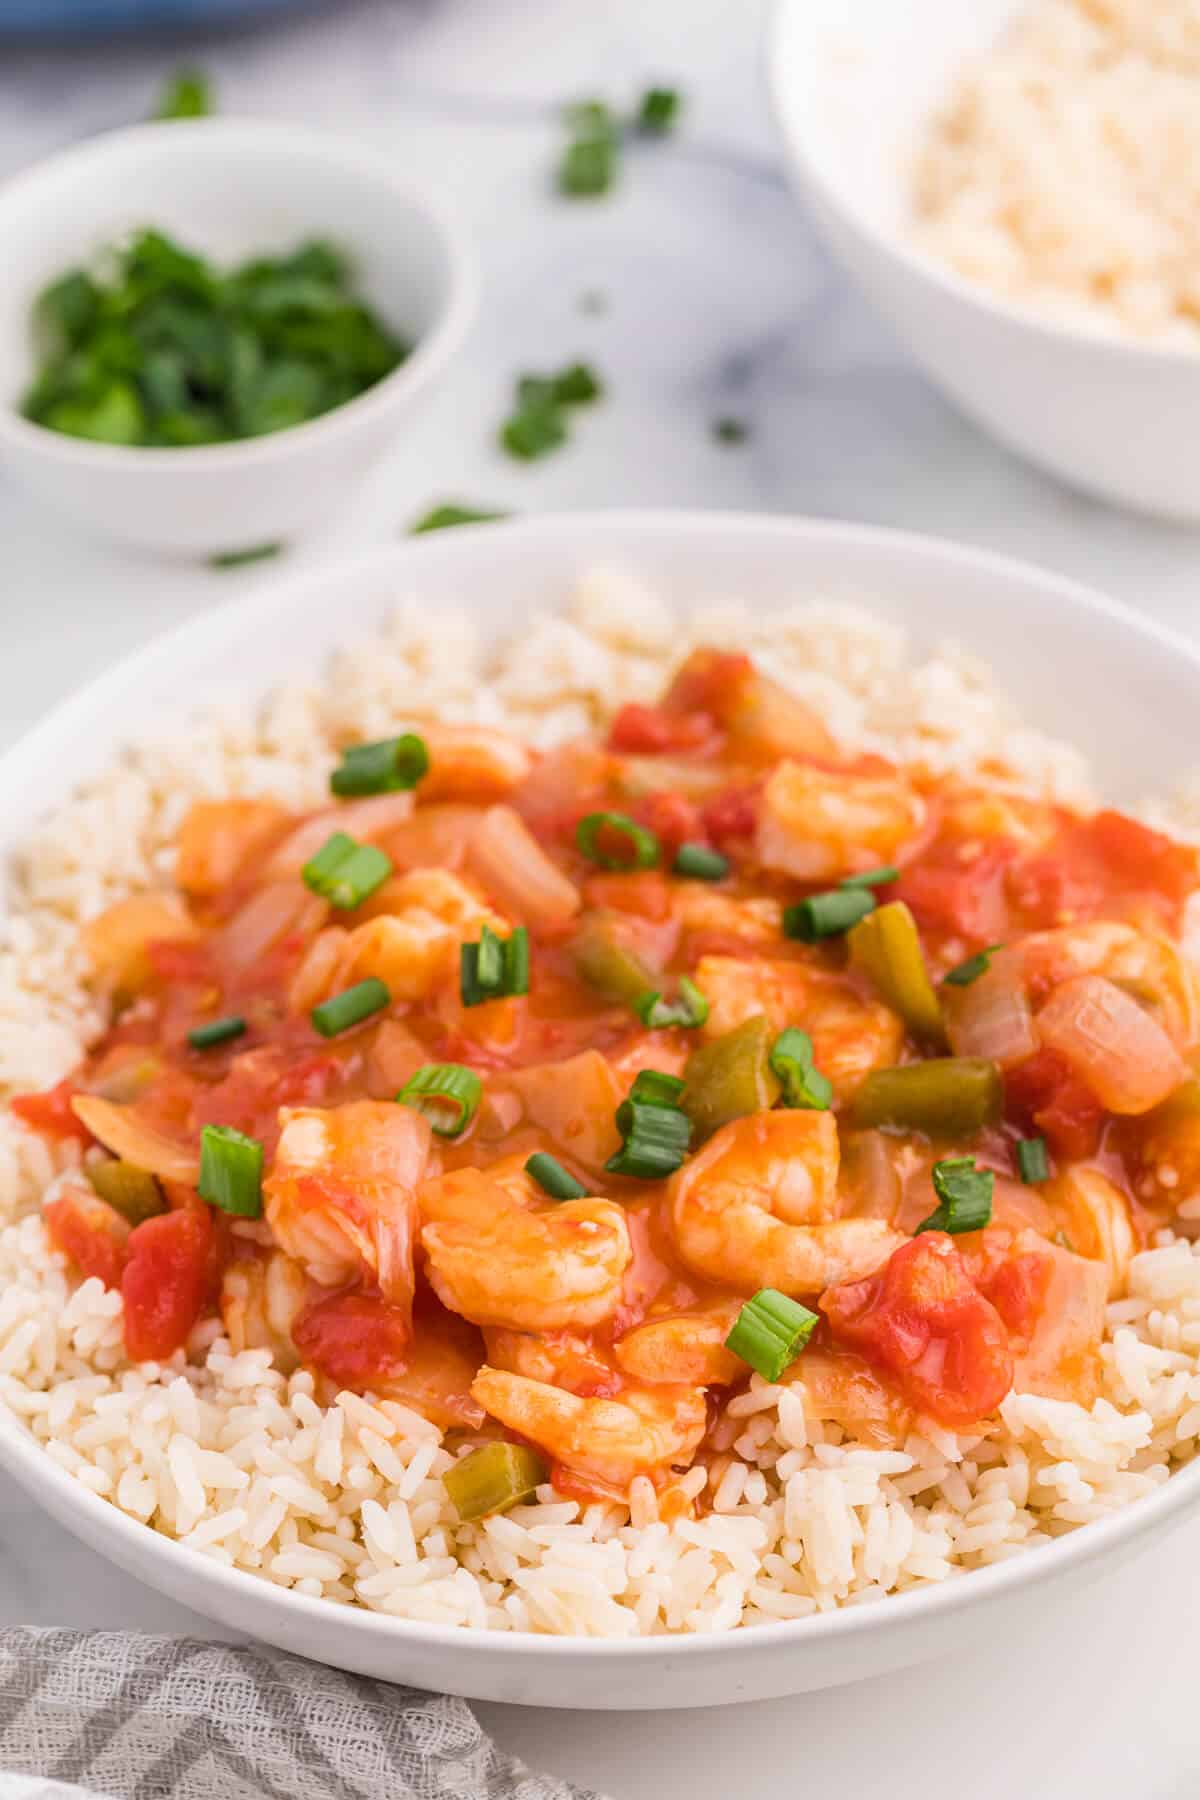 Shrimp creole in a bowl over a bed of rice.